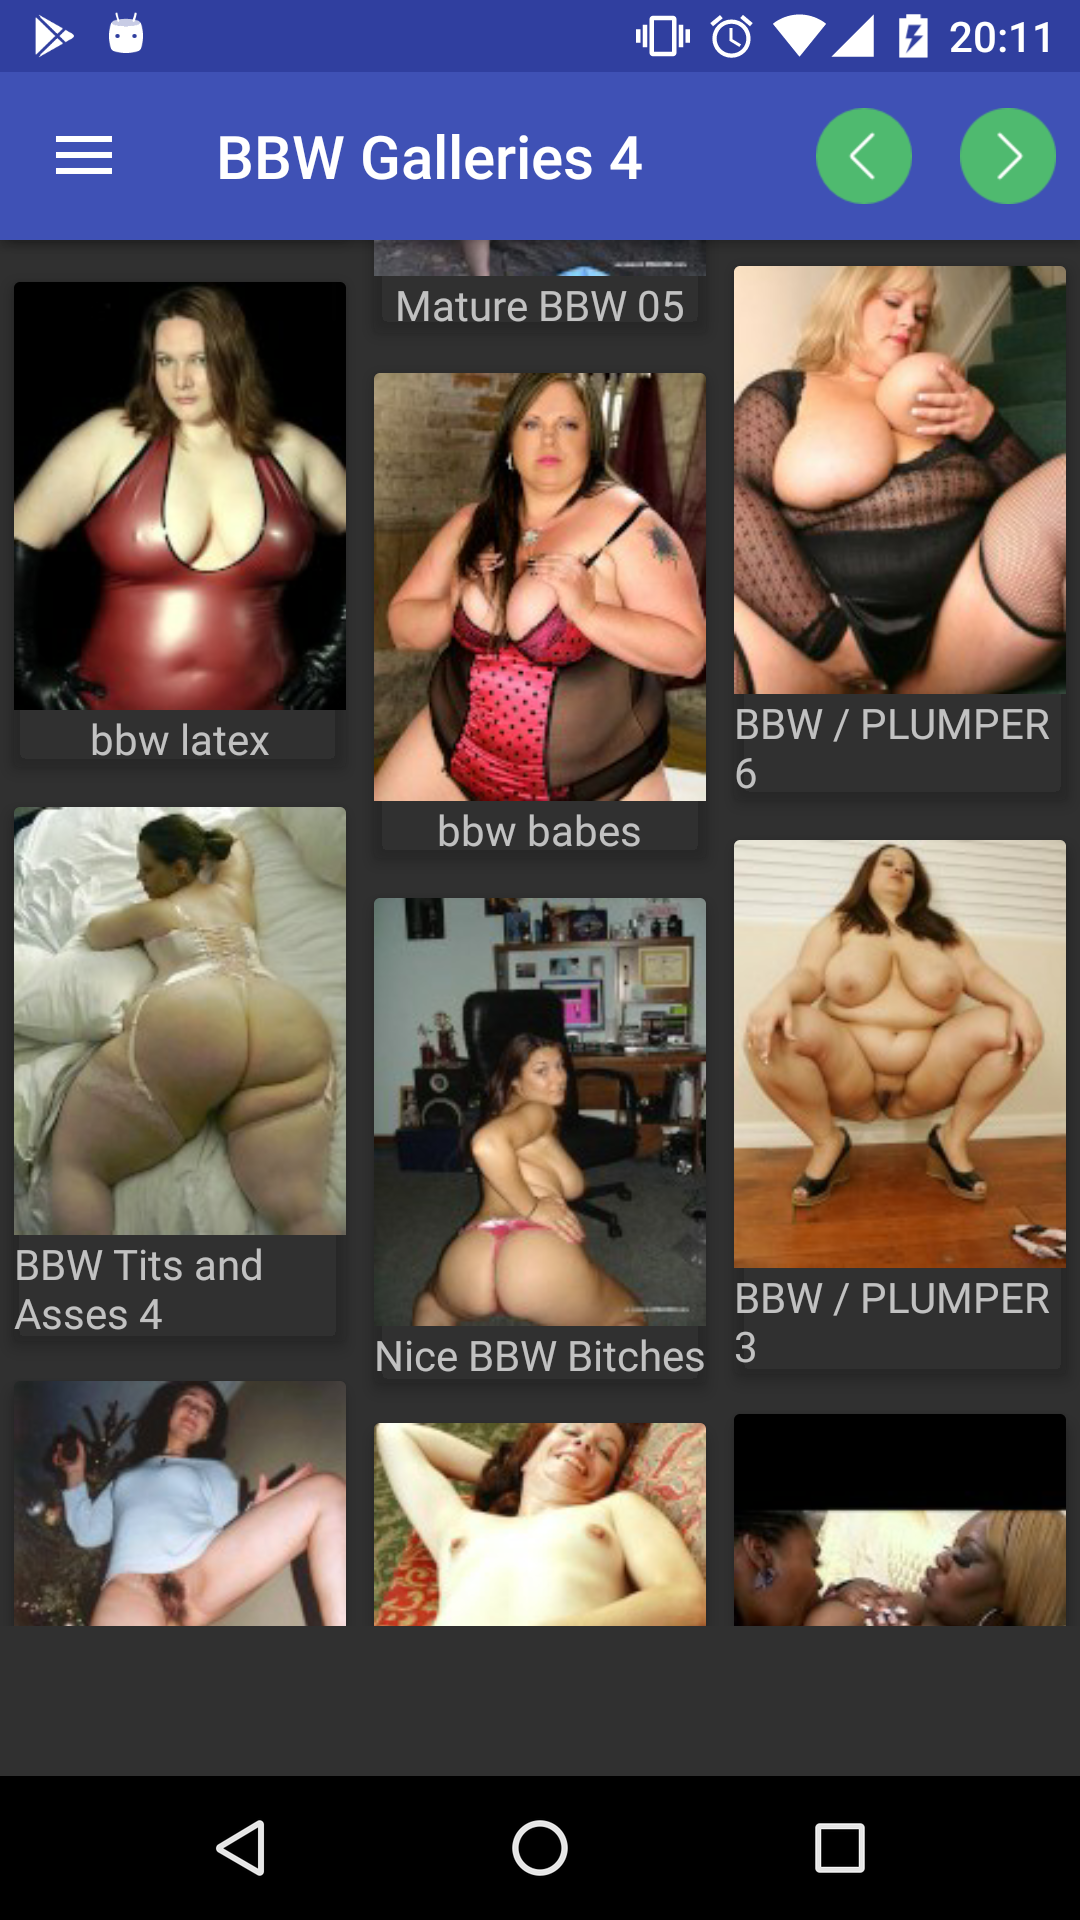 BBW Girls wallpaper,fatty,shemales,anime,amateurs,girls,sexy,chubby,market,android,pornstars,for,erotic,galleries,femboy,images,titty,app,bbw,comic,hentai,best,daily,panties,adult,walpapers